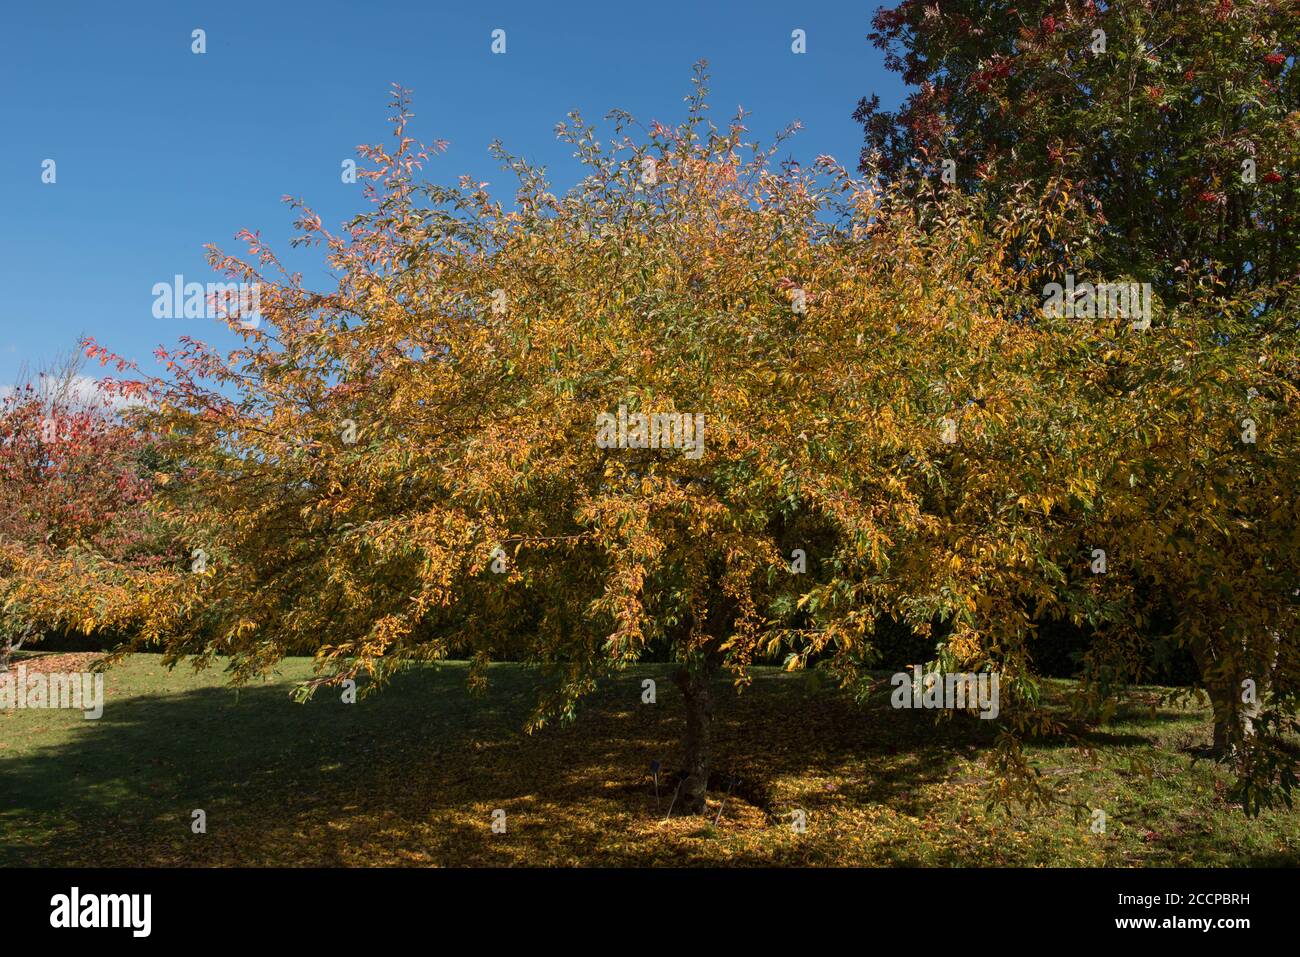 Autumnal Colours of a Cut Leaf Crab Apple Tree (Malus transitoria) with a Cloudy Blue Sky Background in a Park in Rural Devon, England, UK Stock Photo